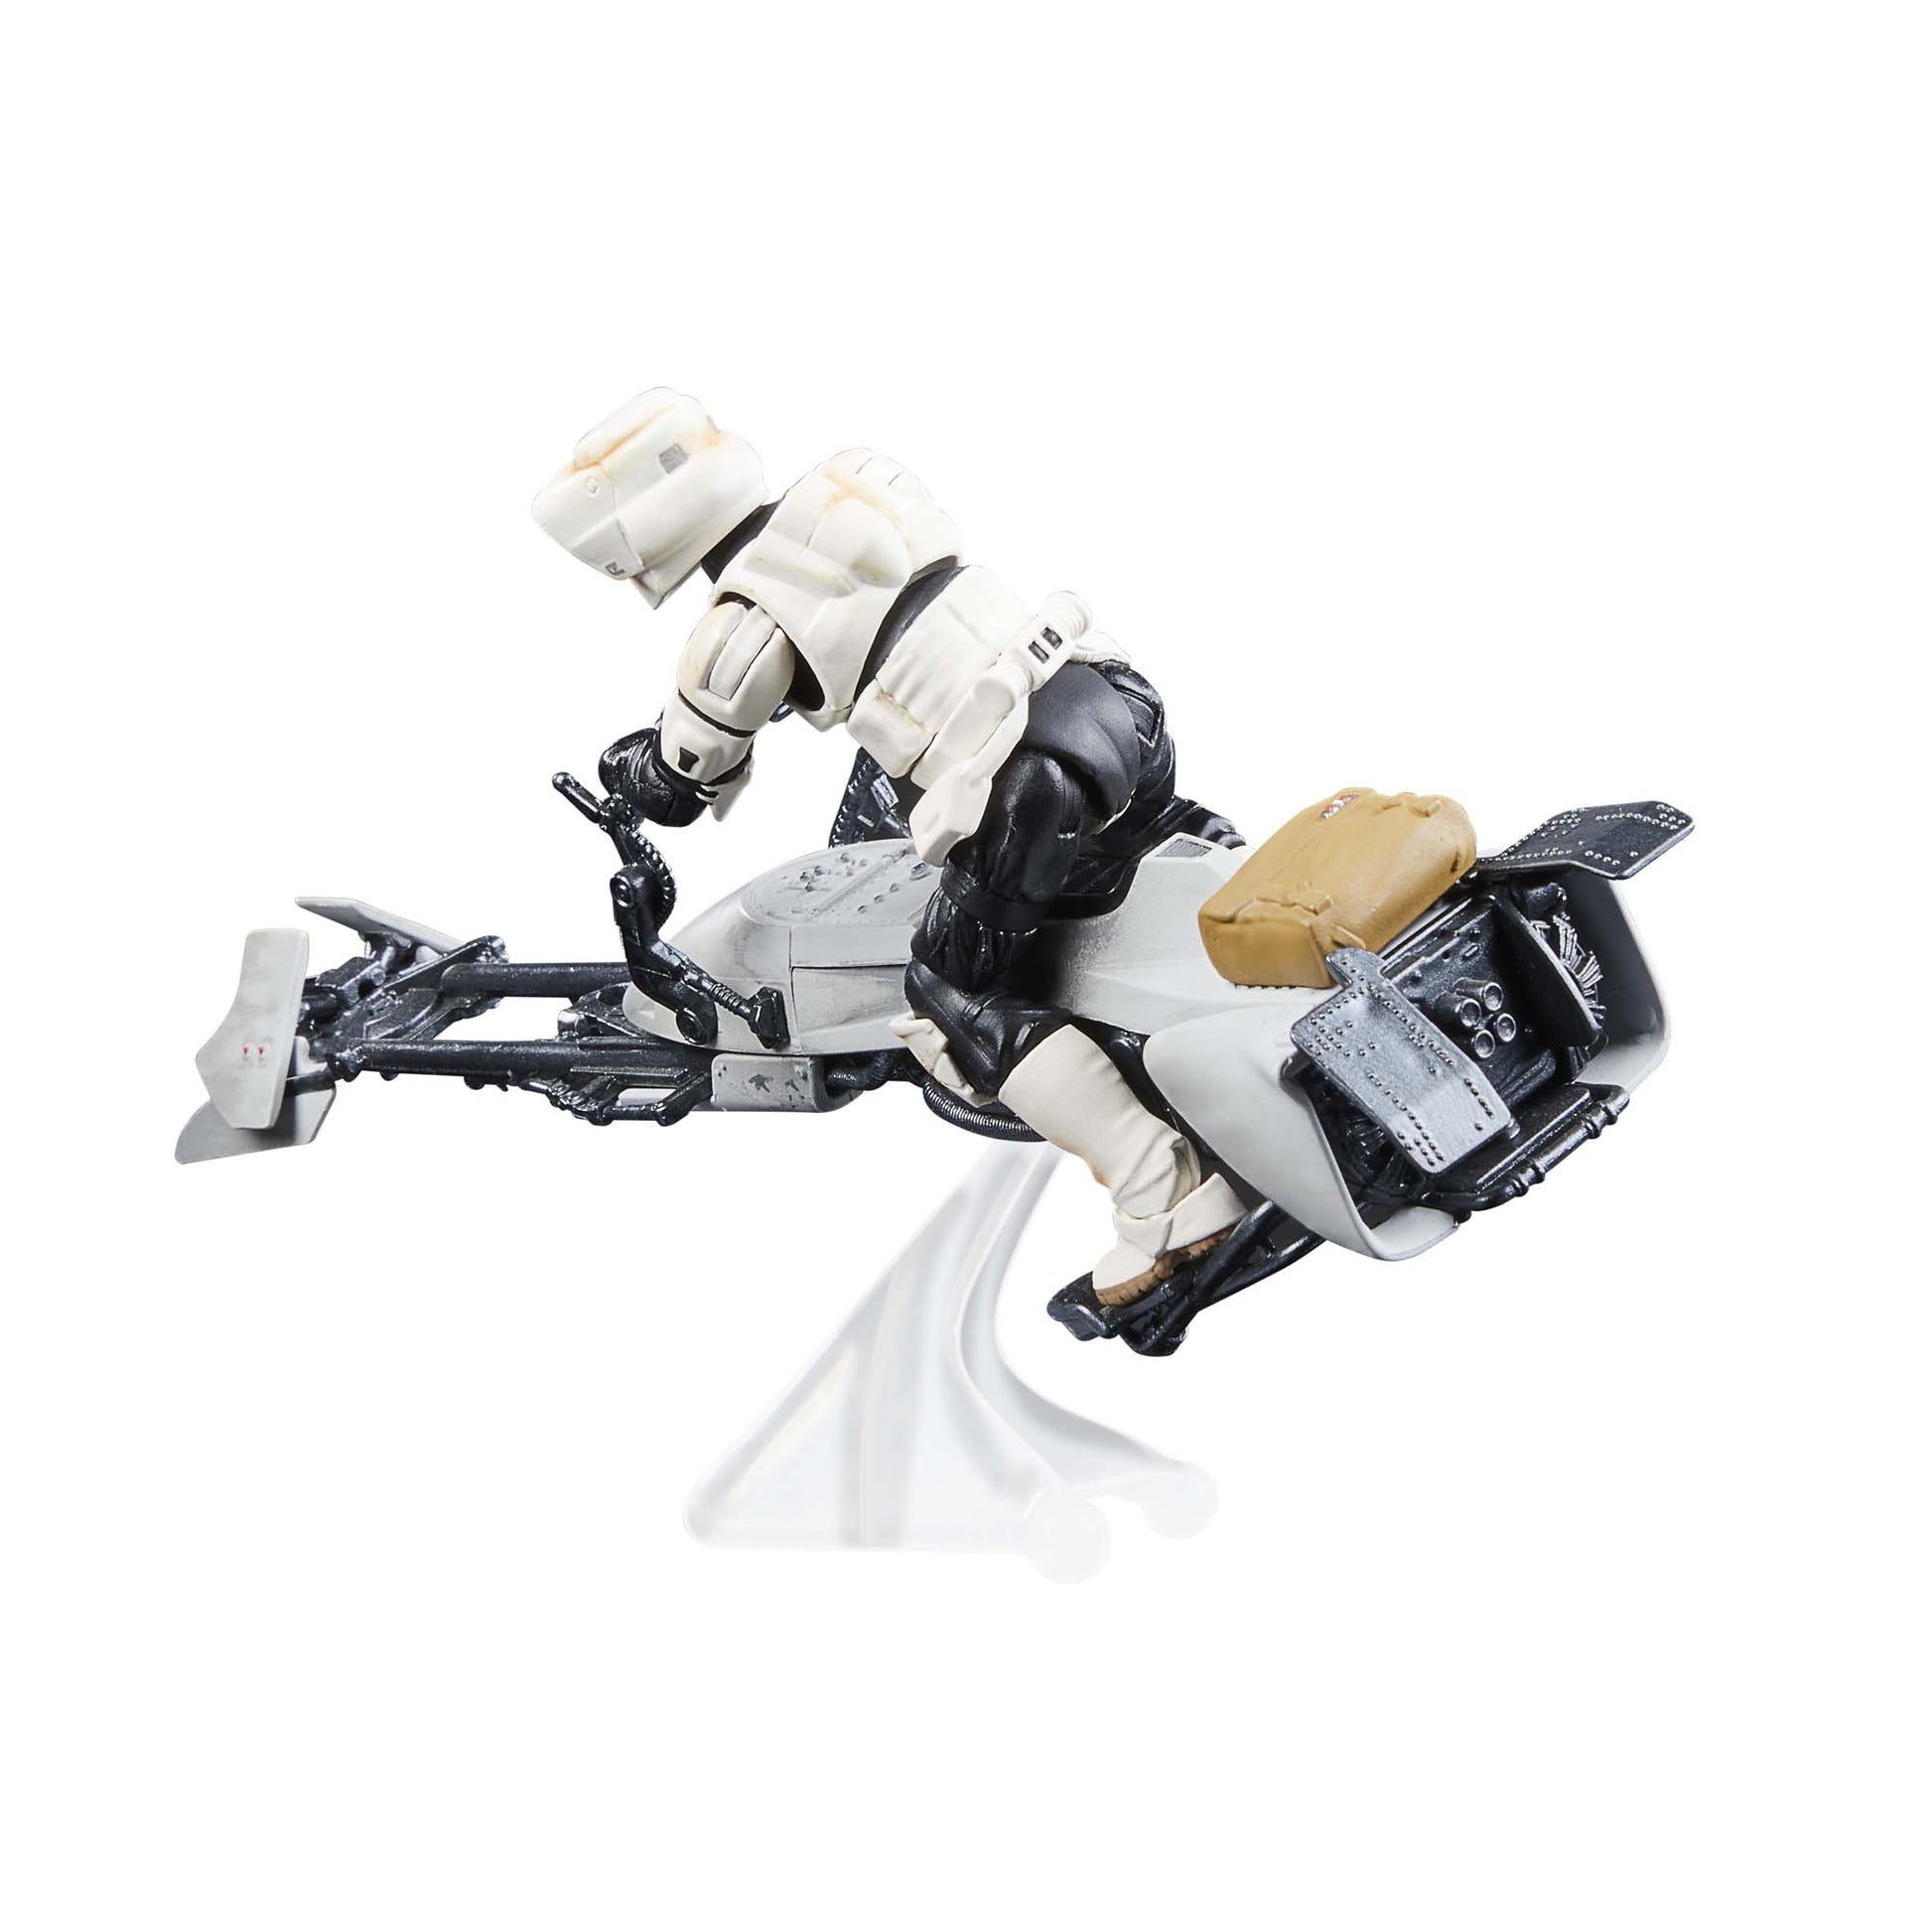 Star Wars The Vintage Collection Speeder Bike Action Figure Toy on a bike back view - Heretoserveyou